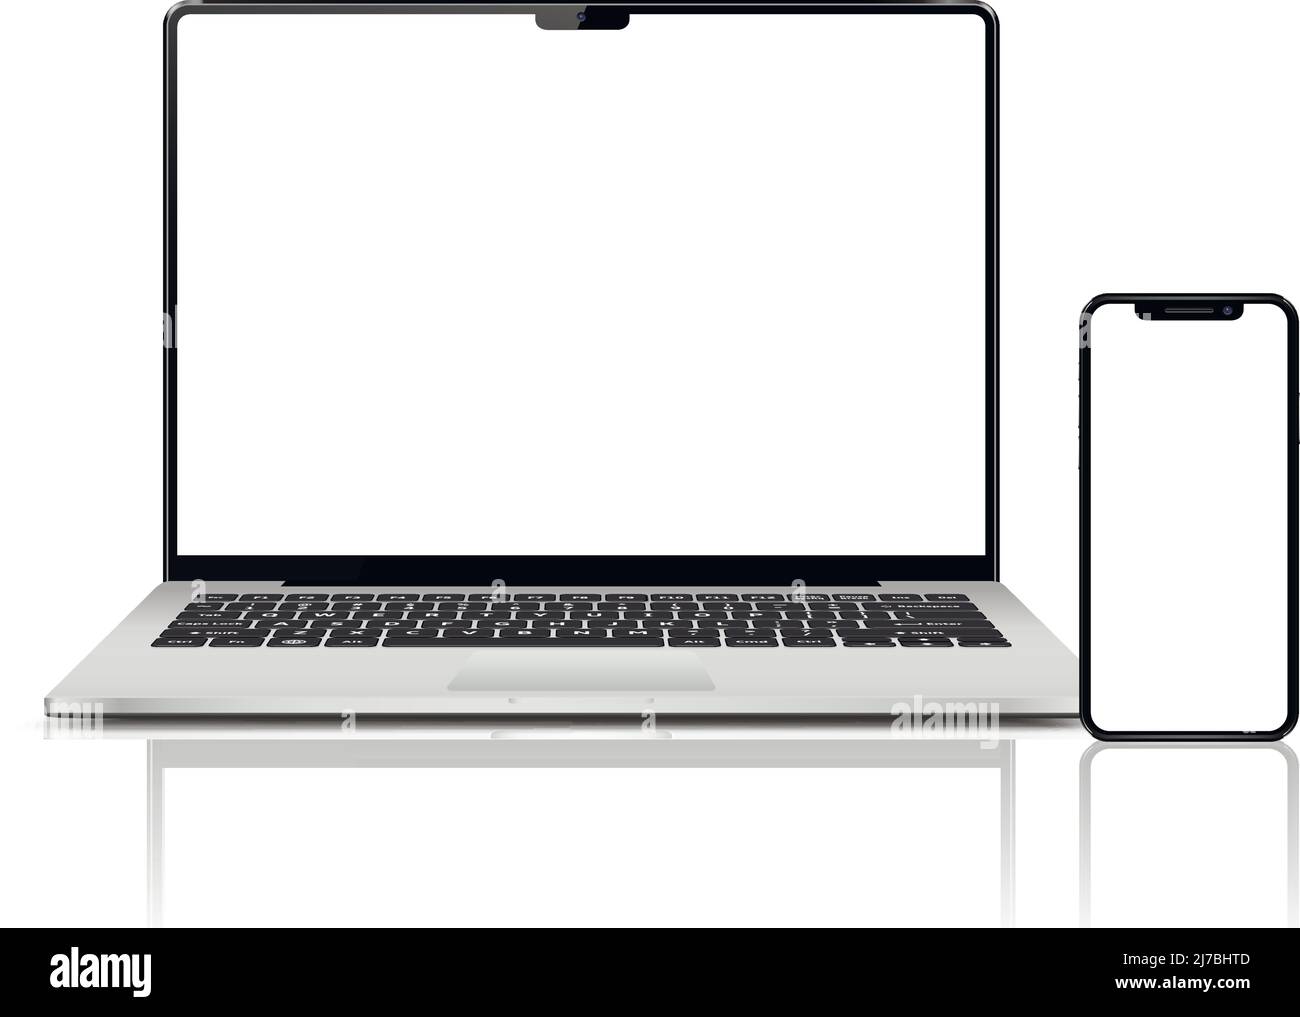 Laptop computer and mobile phone mockups isolated on white background Stock Vector